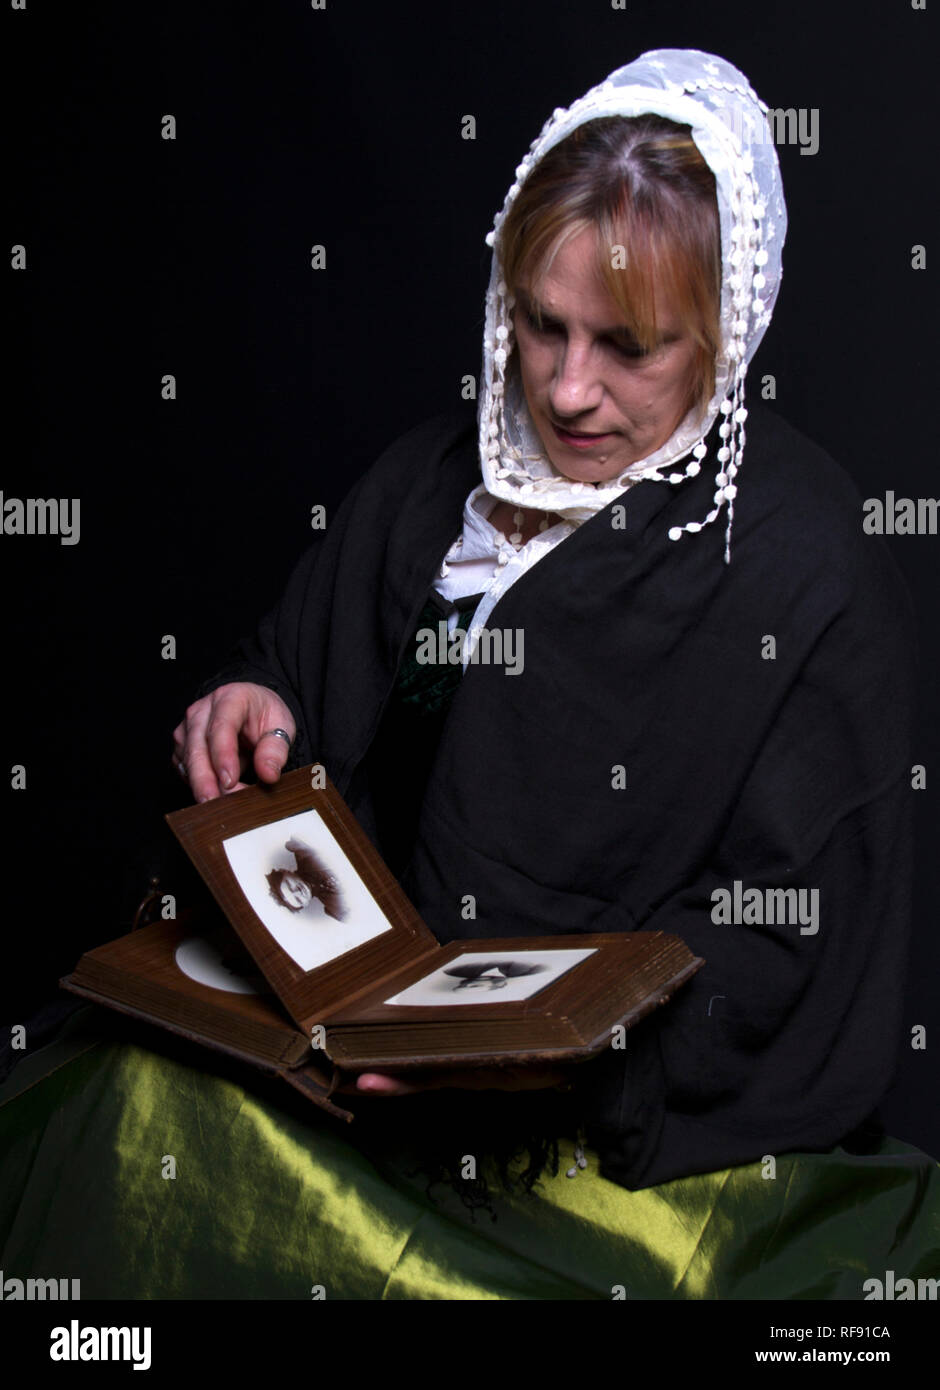 Dickensian costumed  lady reading antique book Stock Photo